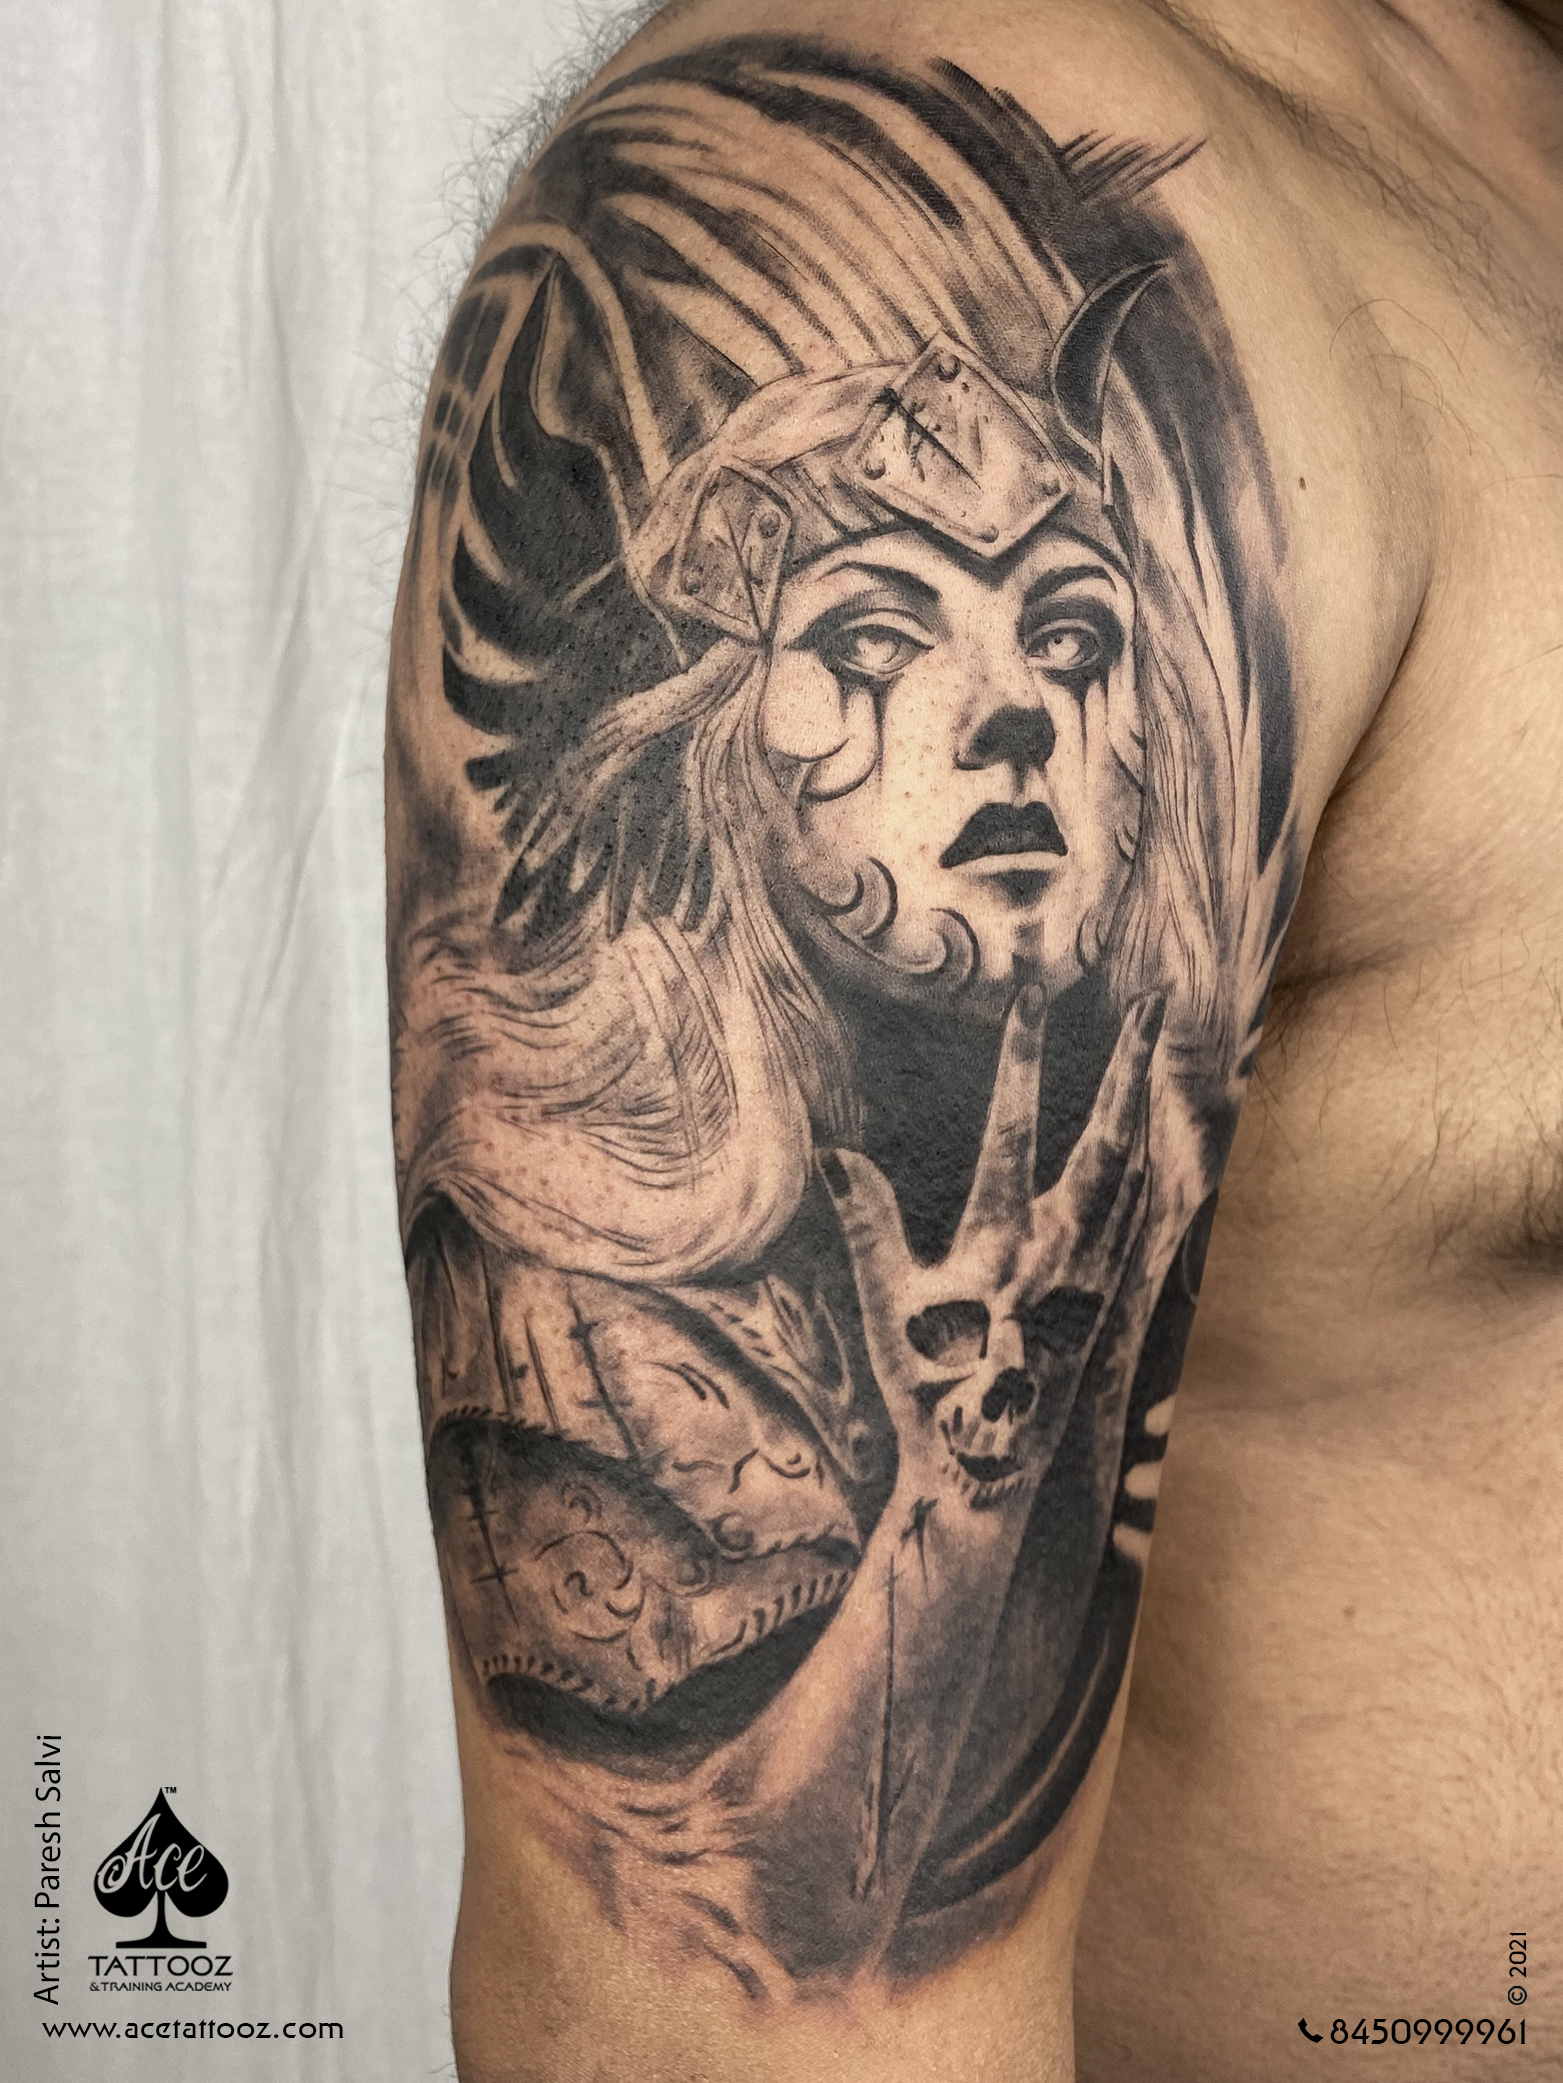 23 Exceptional Valkyrie Tattoo Ideas and Meanings  Valkyrie tattoo Tattoos  Nordic tattoo